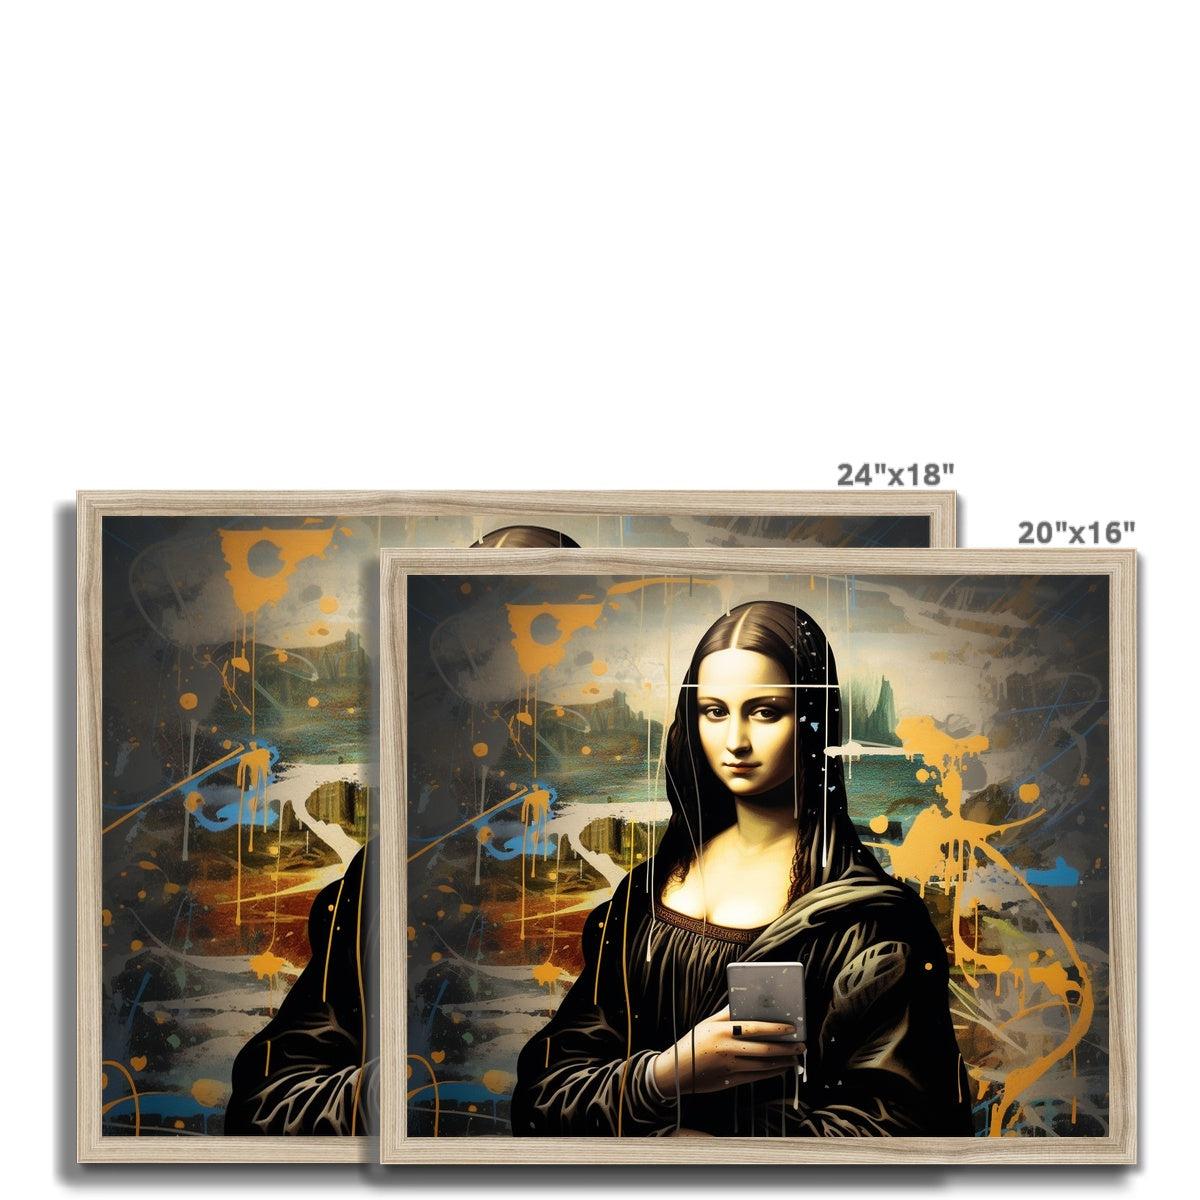 Millenial: The Mona Lisa Limited Edition Framed Print